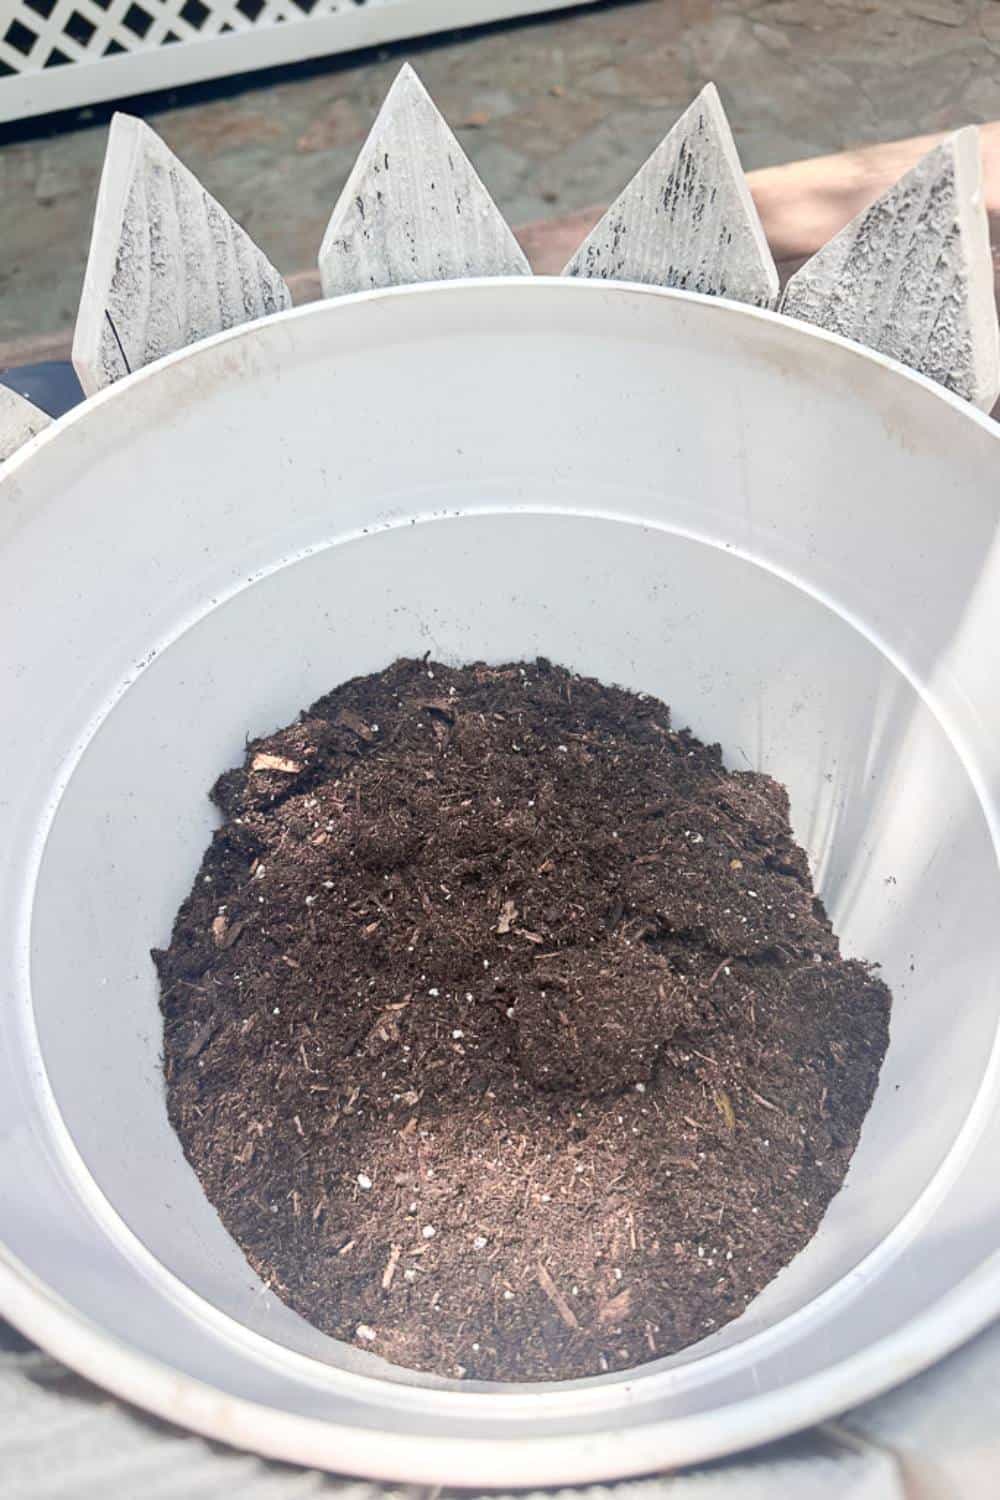 Soil inside of a flower pot with white pickets around the outside.